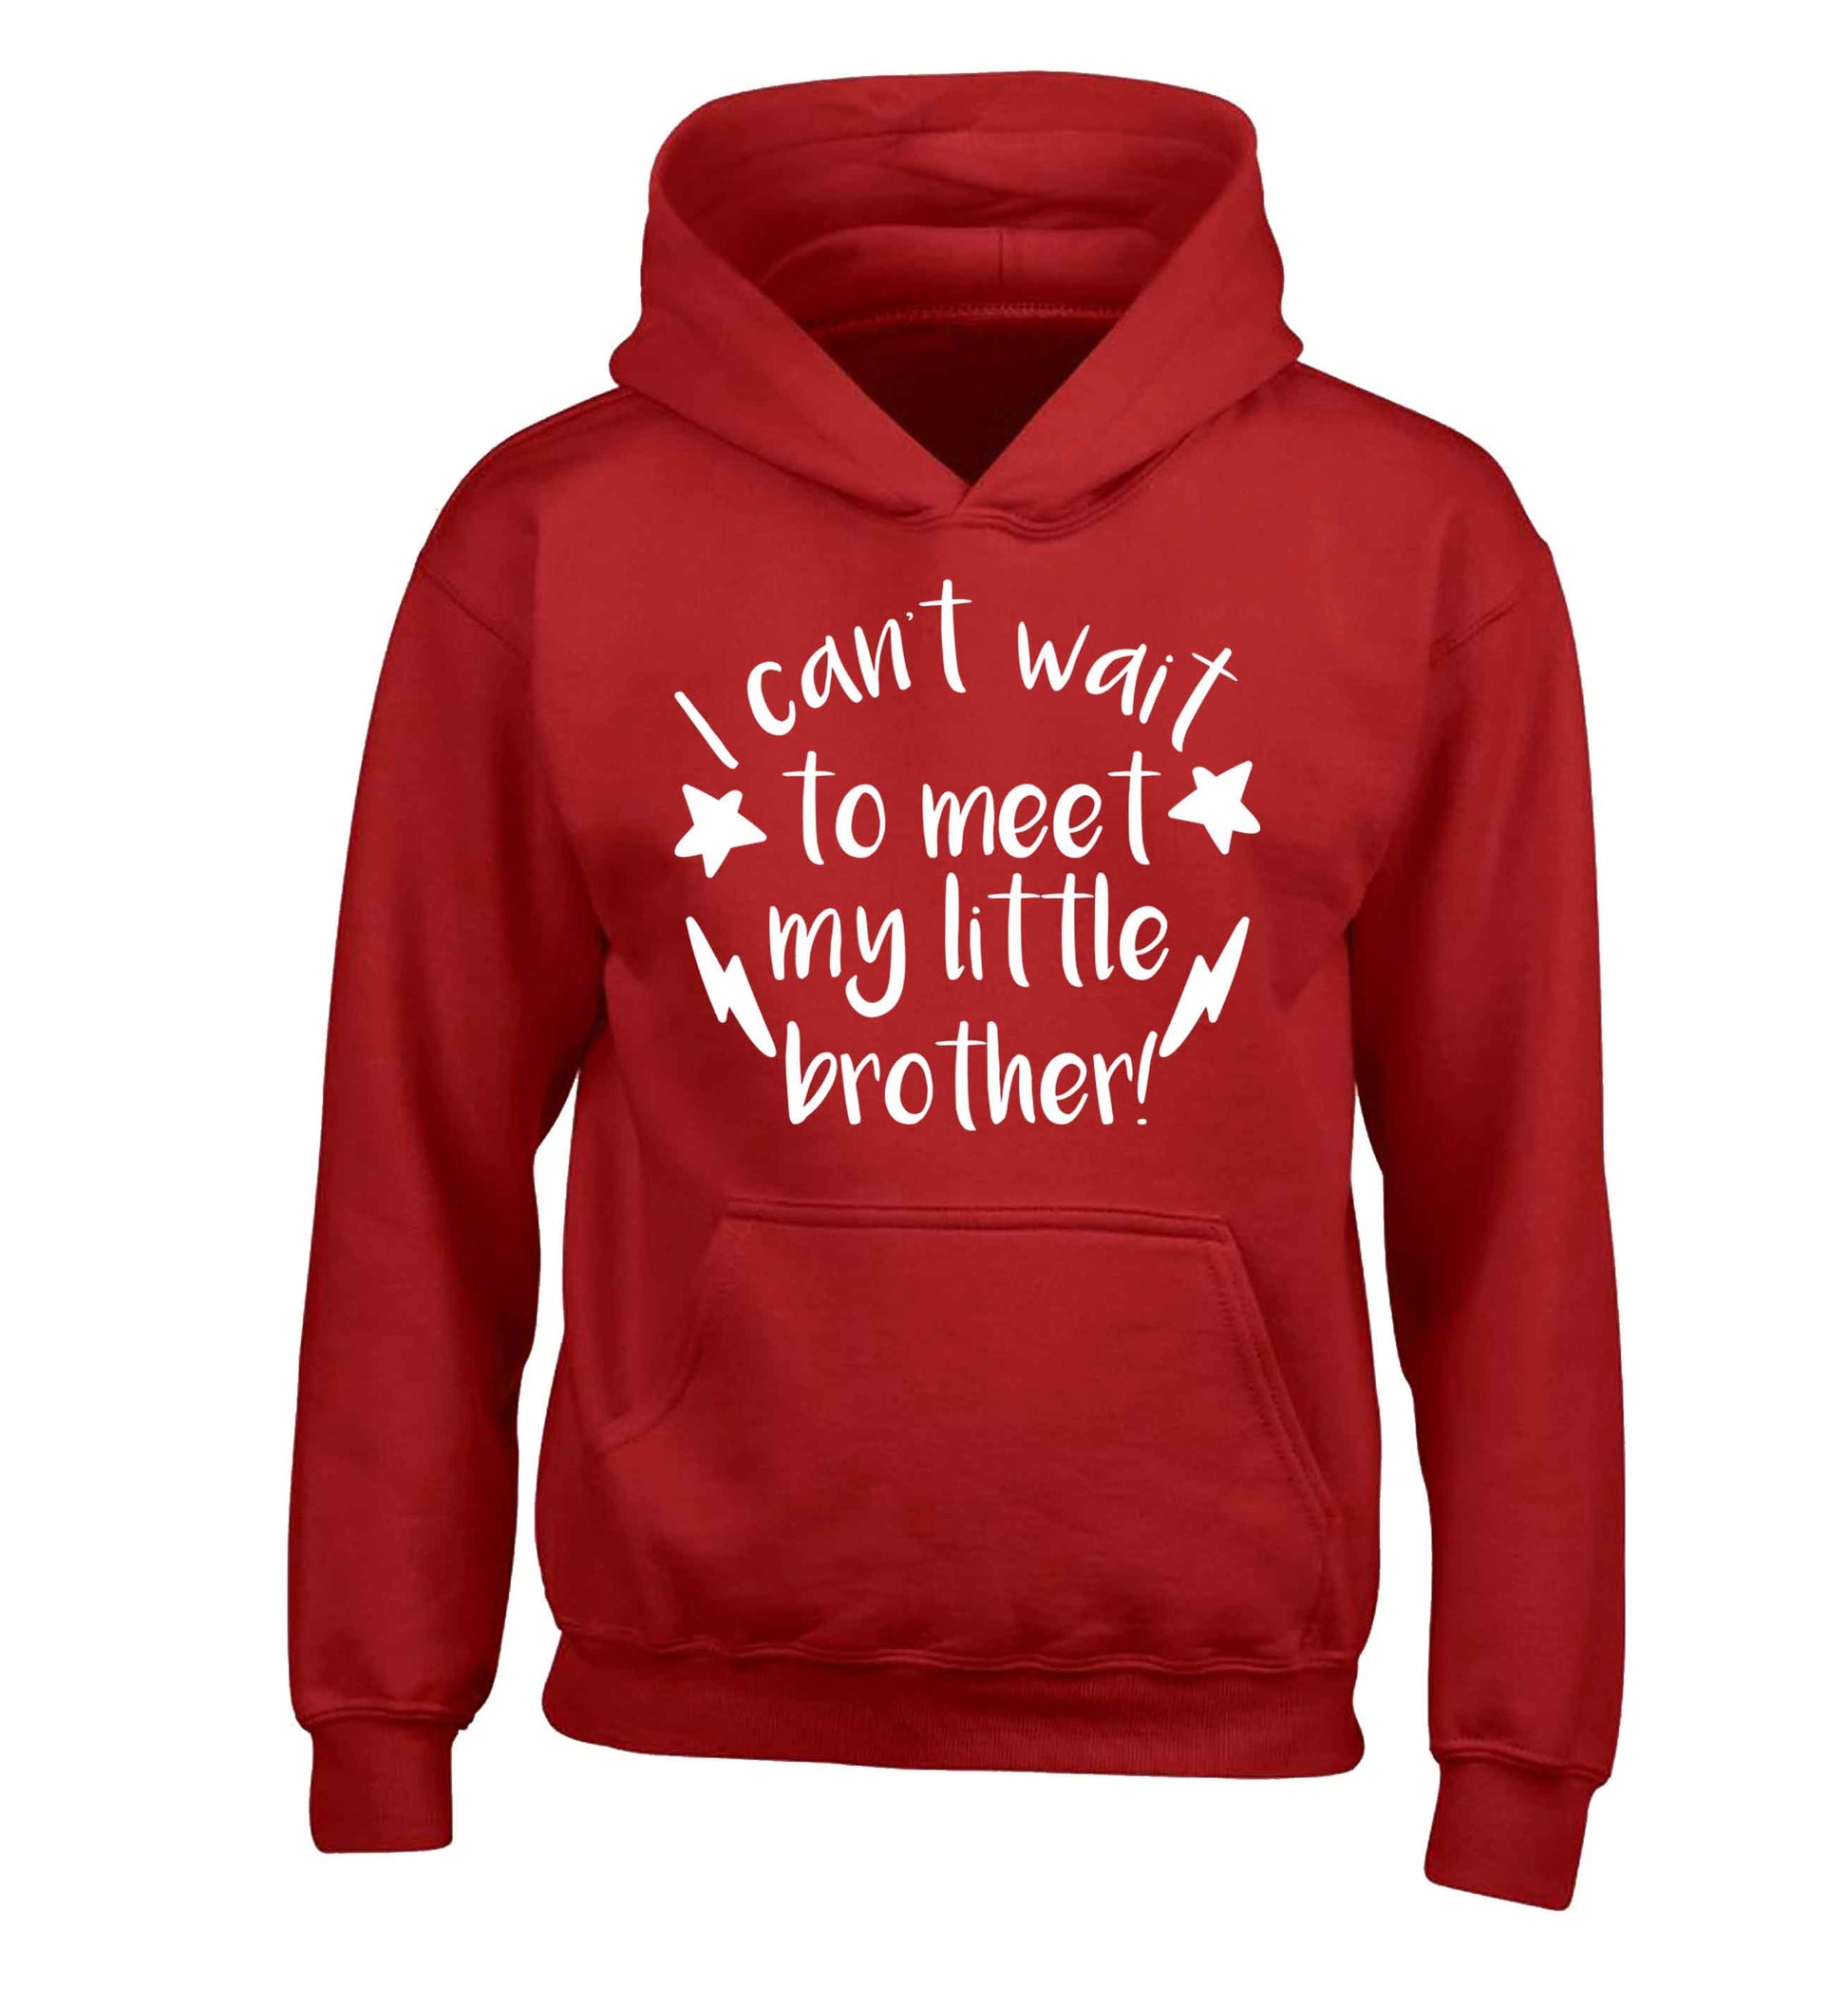 I can't wait to meet my sister! children's red hoodie 12-13 Years